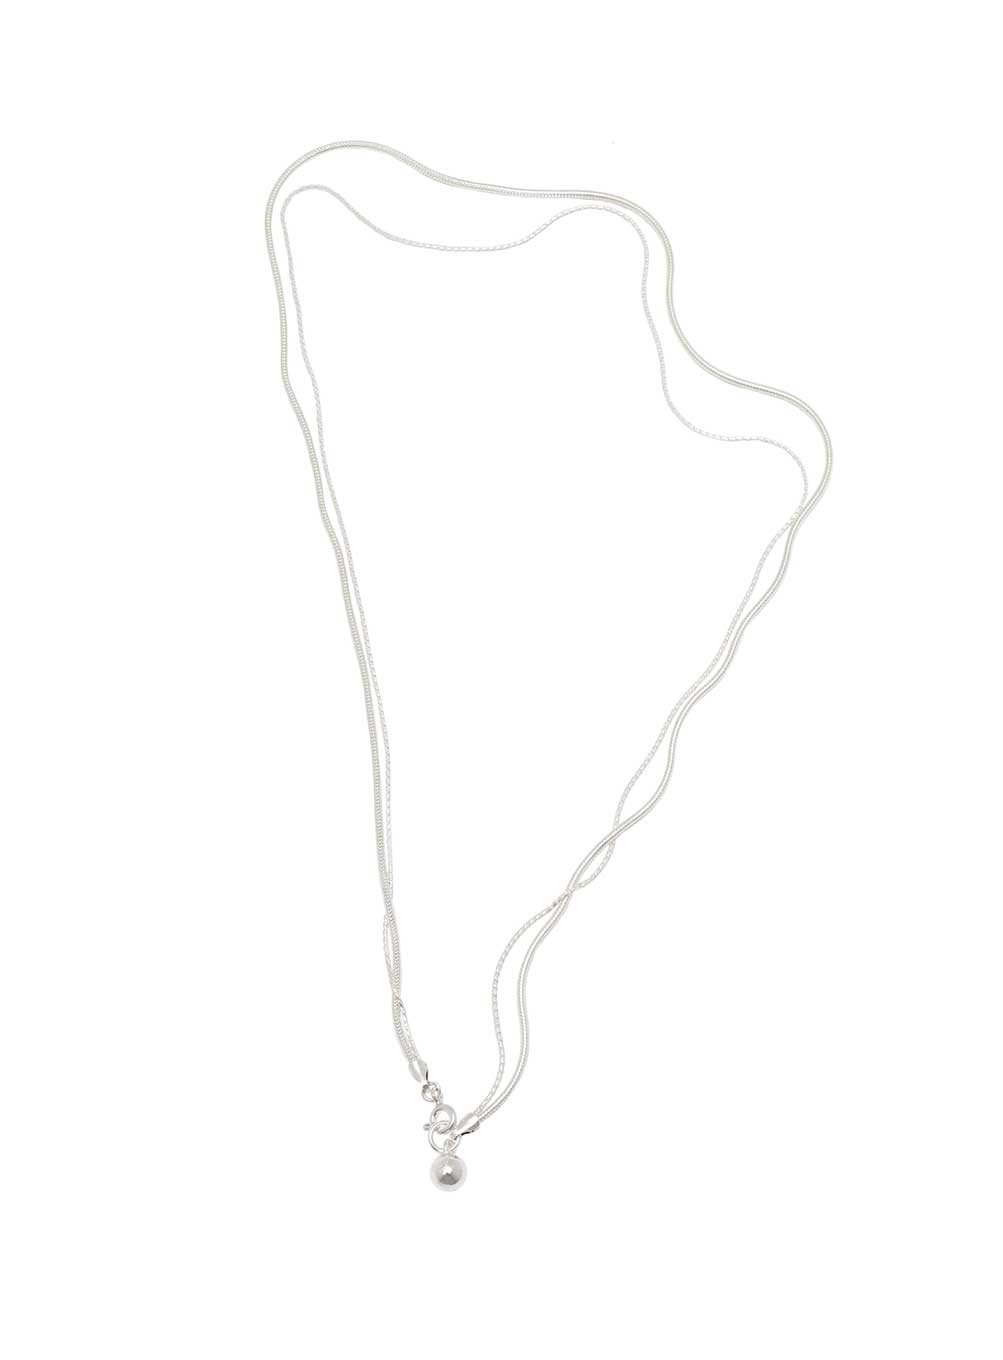 silhouette necklace